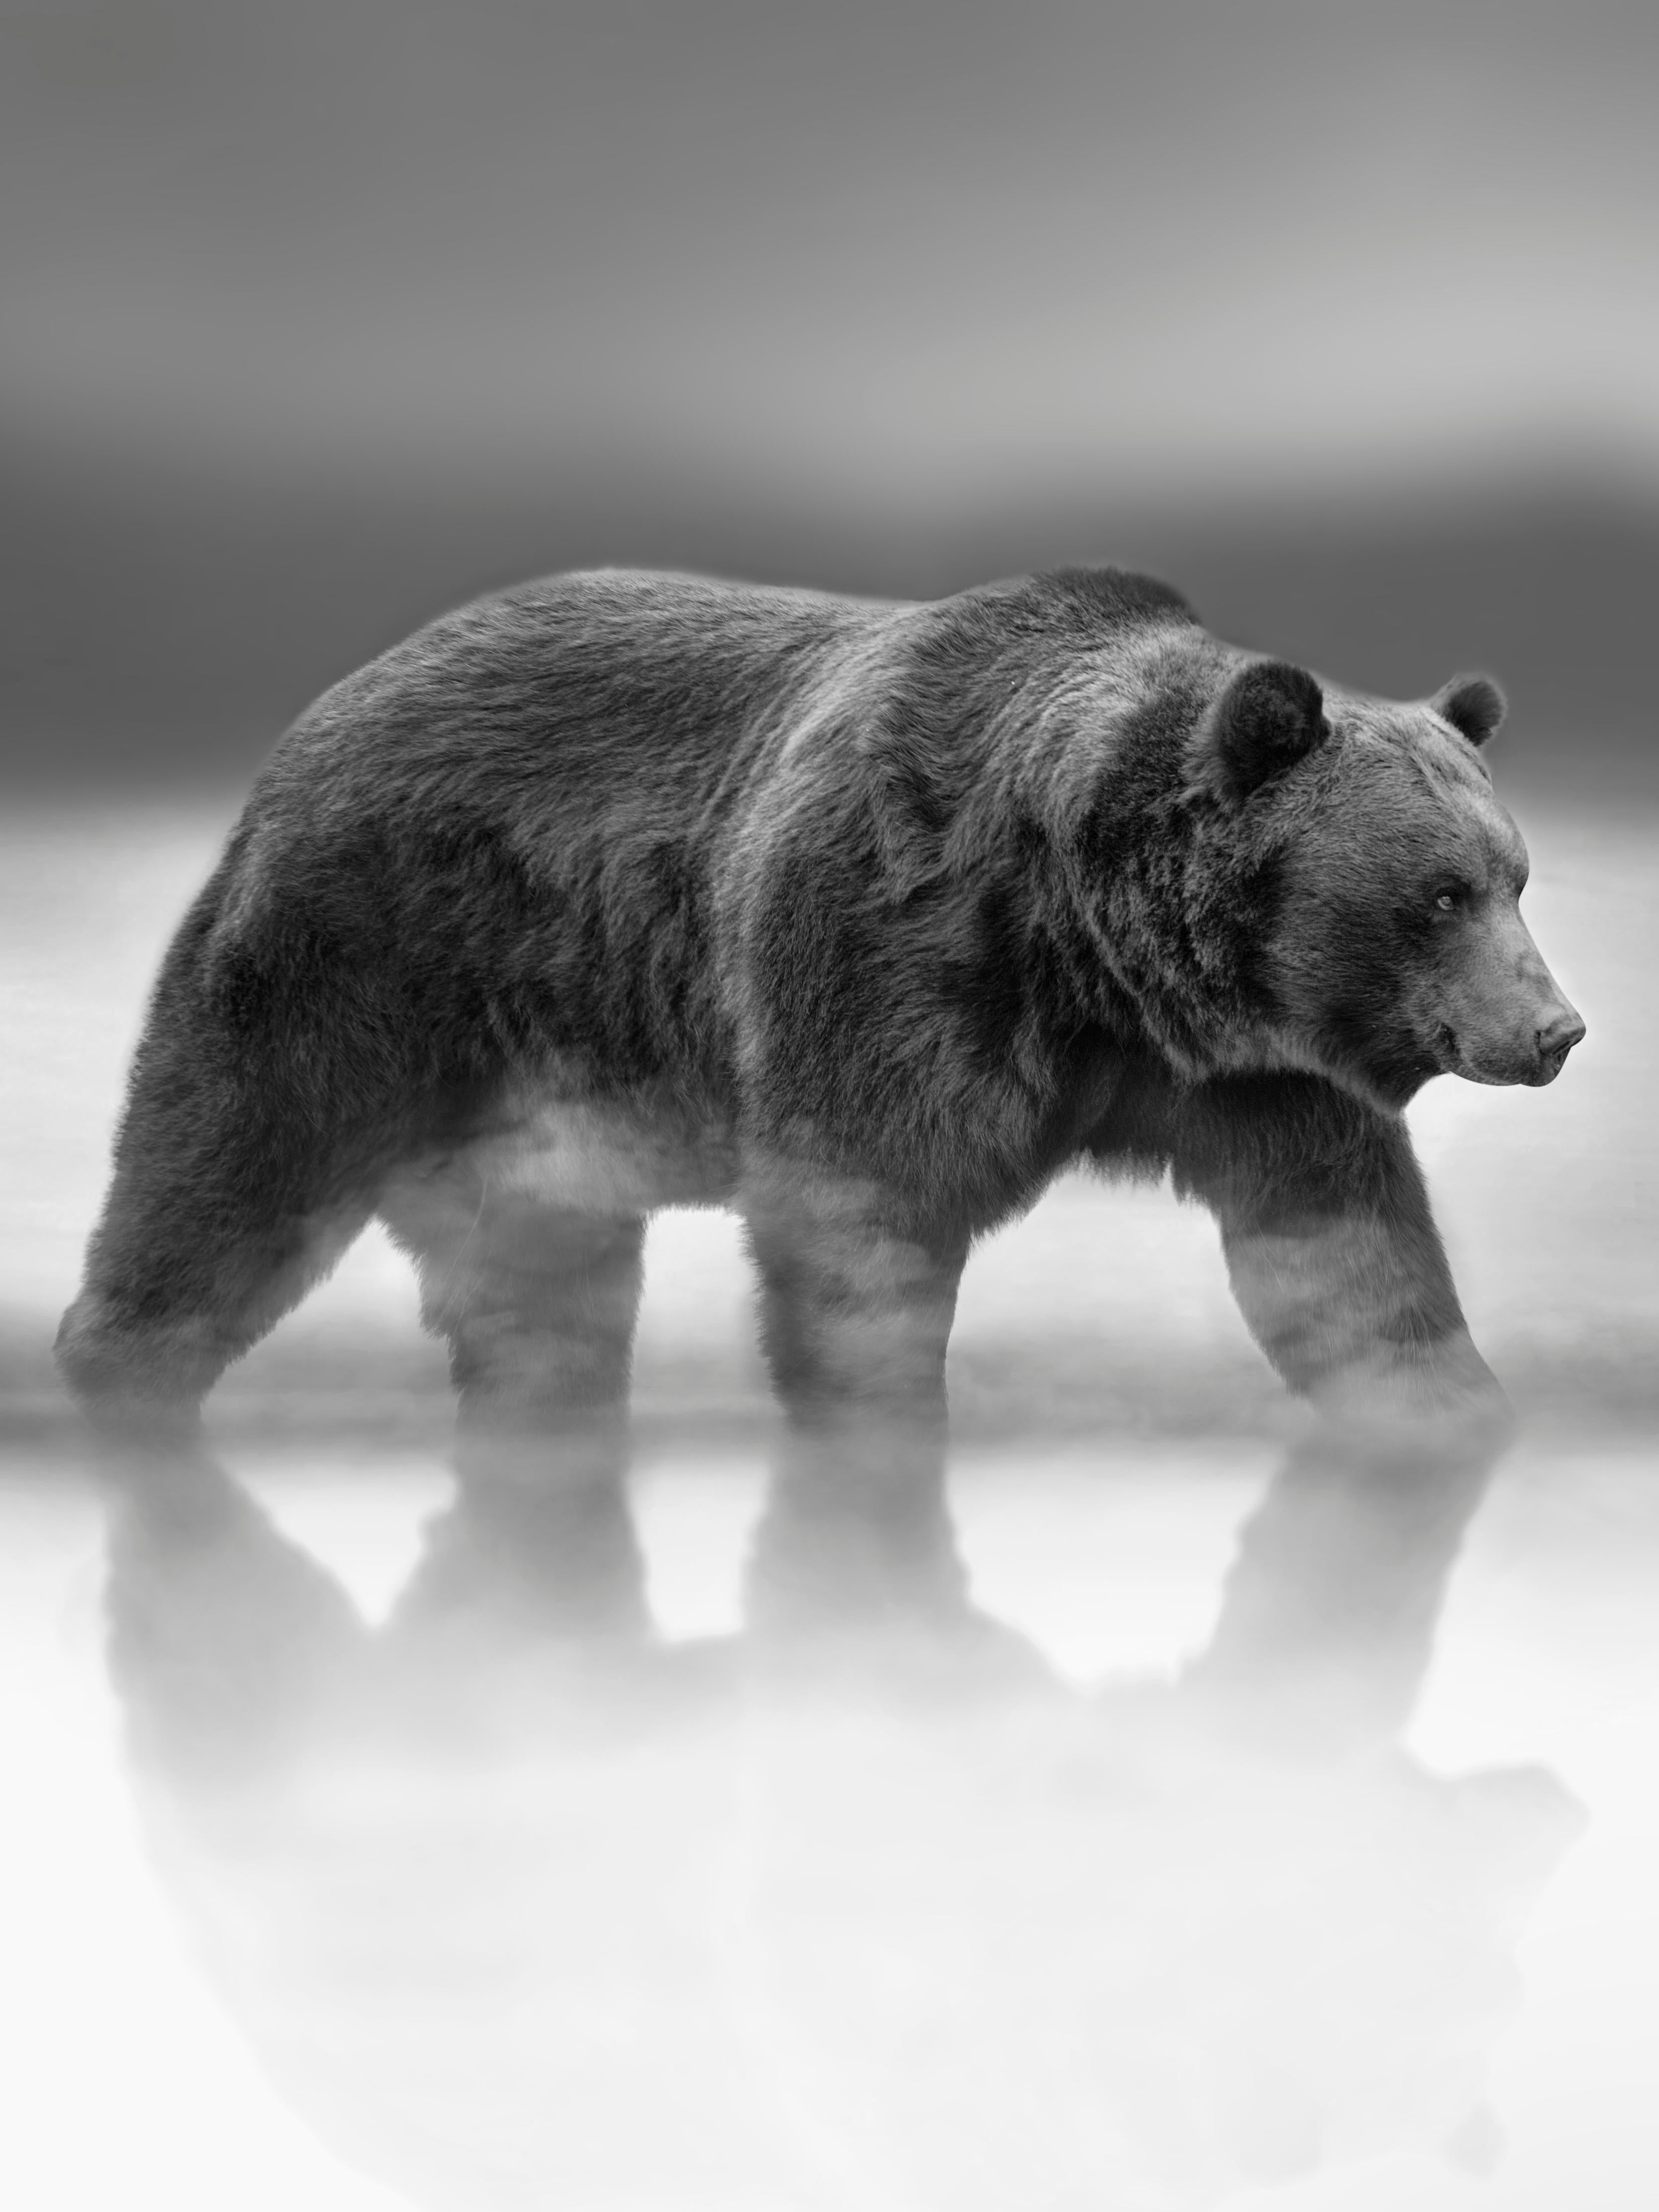 Shane Russeck Black and White Photograph - Kodiak Island 36x48 Black & White Photography, Kodiak Grizzly Bear Wildlife 